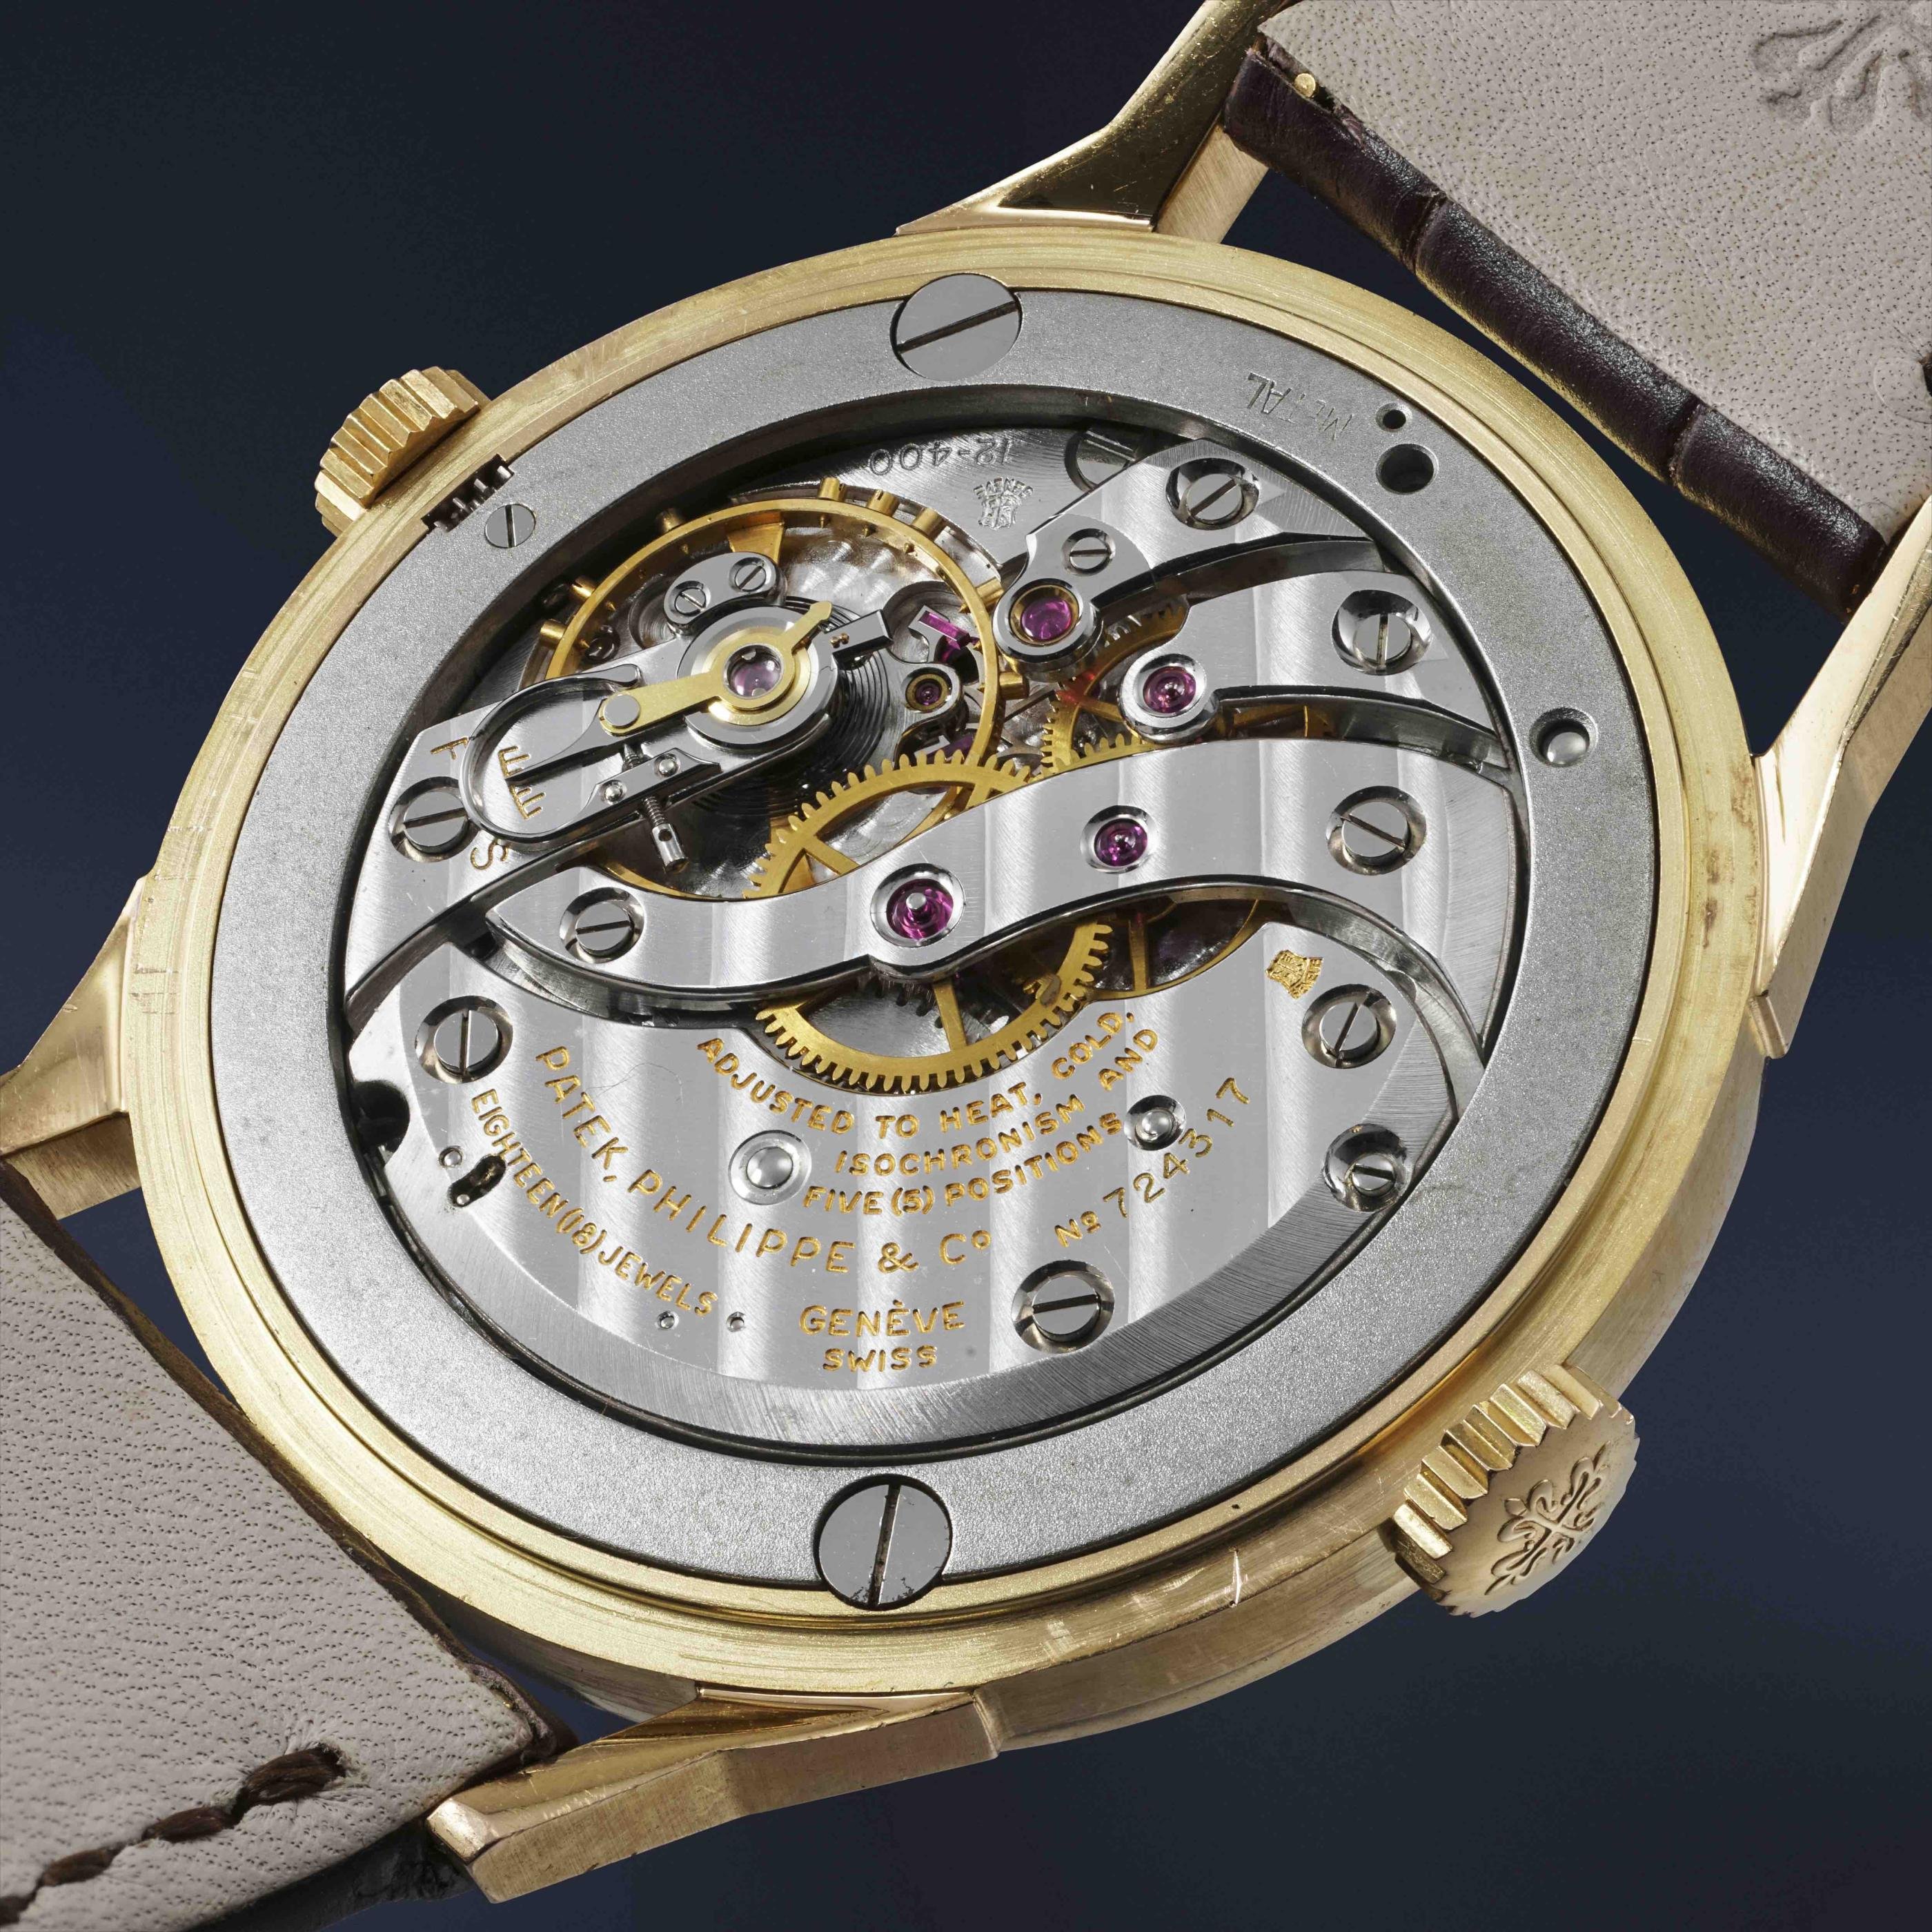 An extremely rare Patek Philippe to be auctioned in Geneva